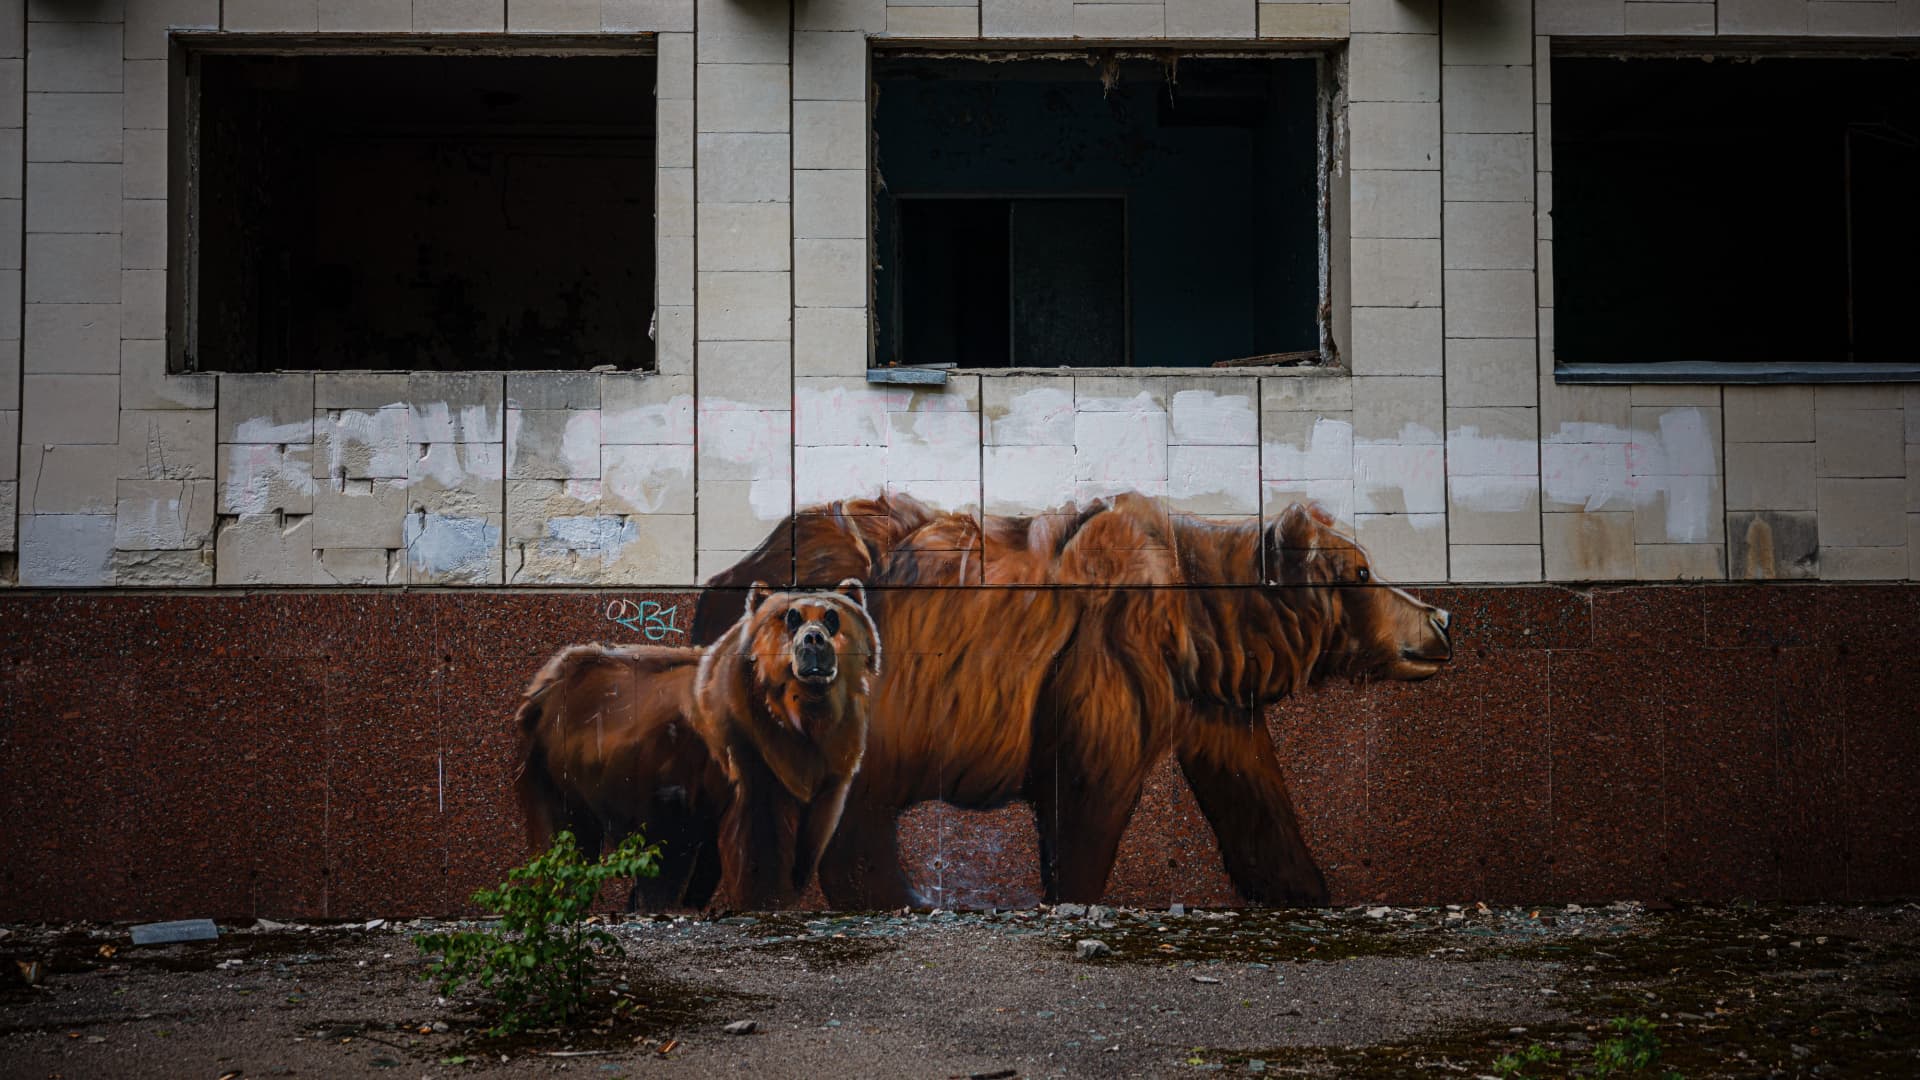 A photograph shows a graffiti depicting bears in the ghost town of Pripyat near the Chornobyl Nuclear Power Plant on May 29, 2022, amid the Russian invasion of Ukraine.